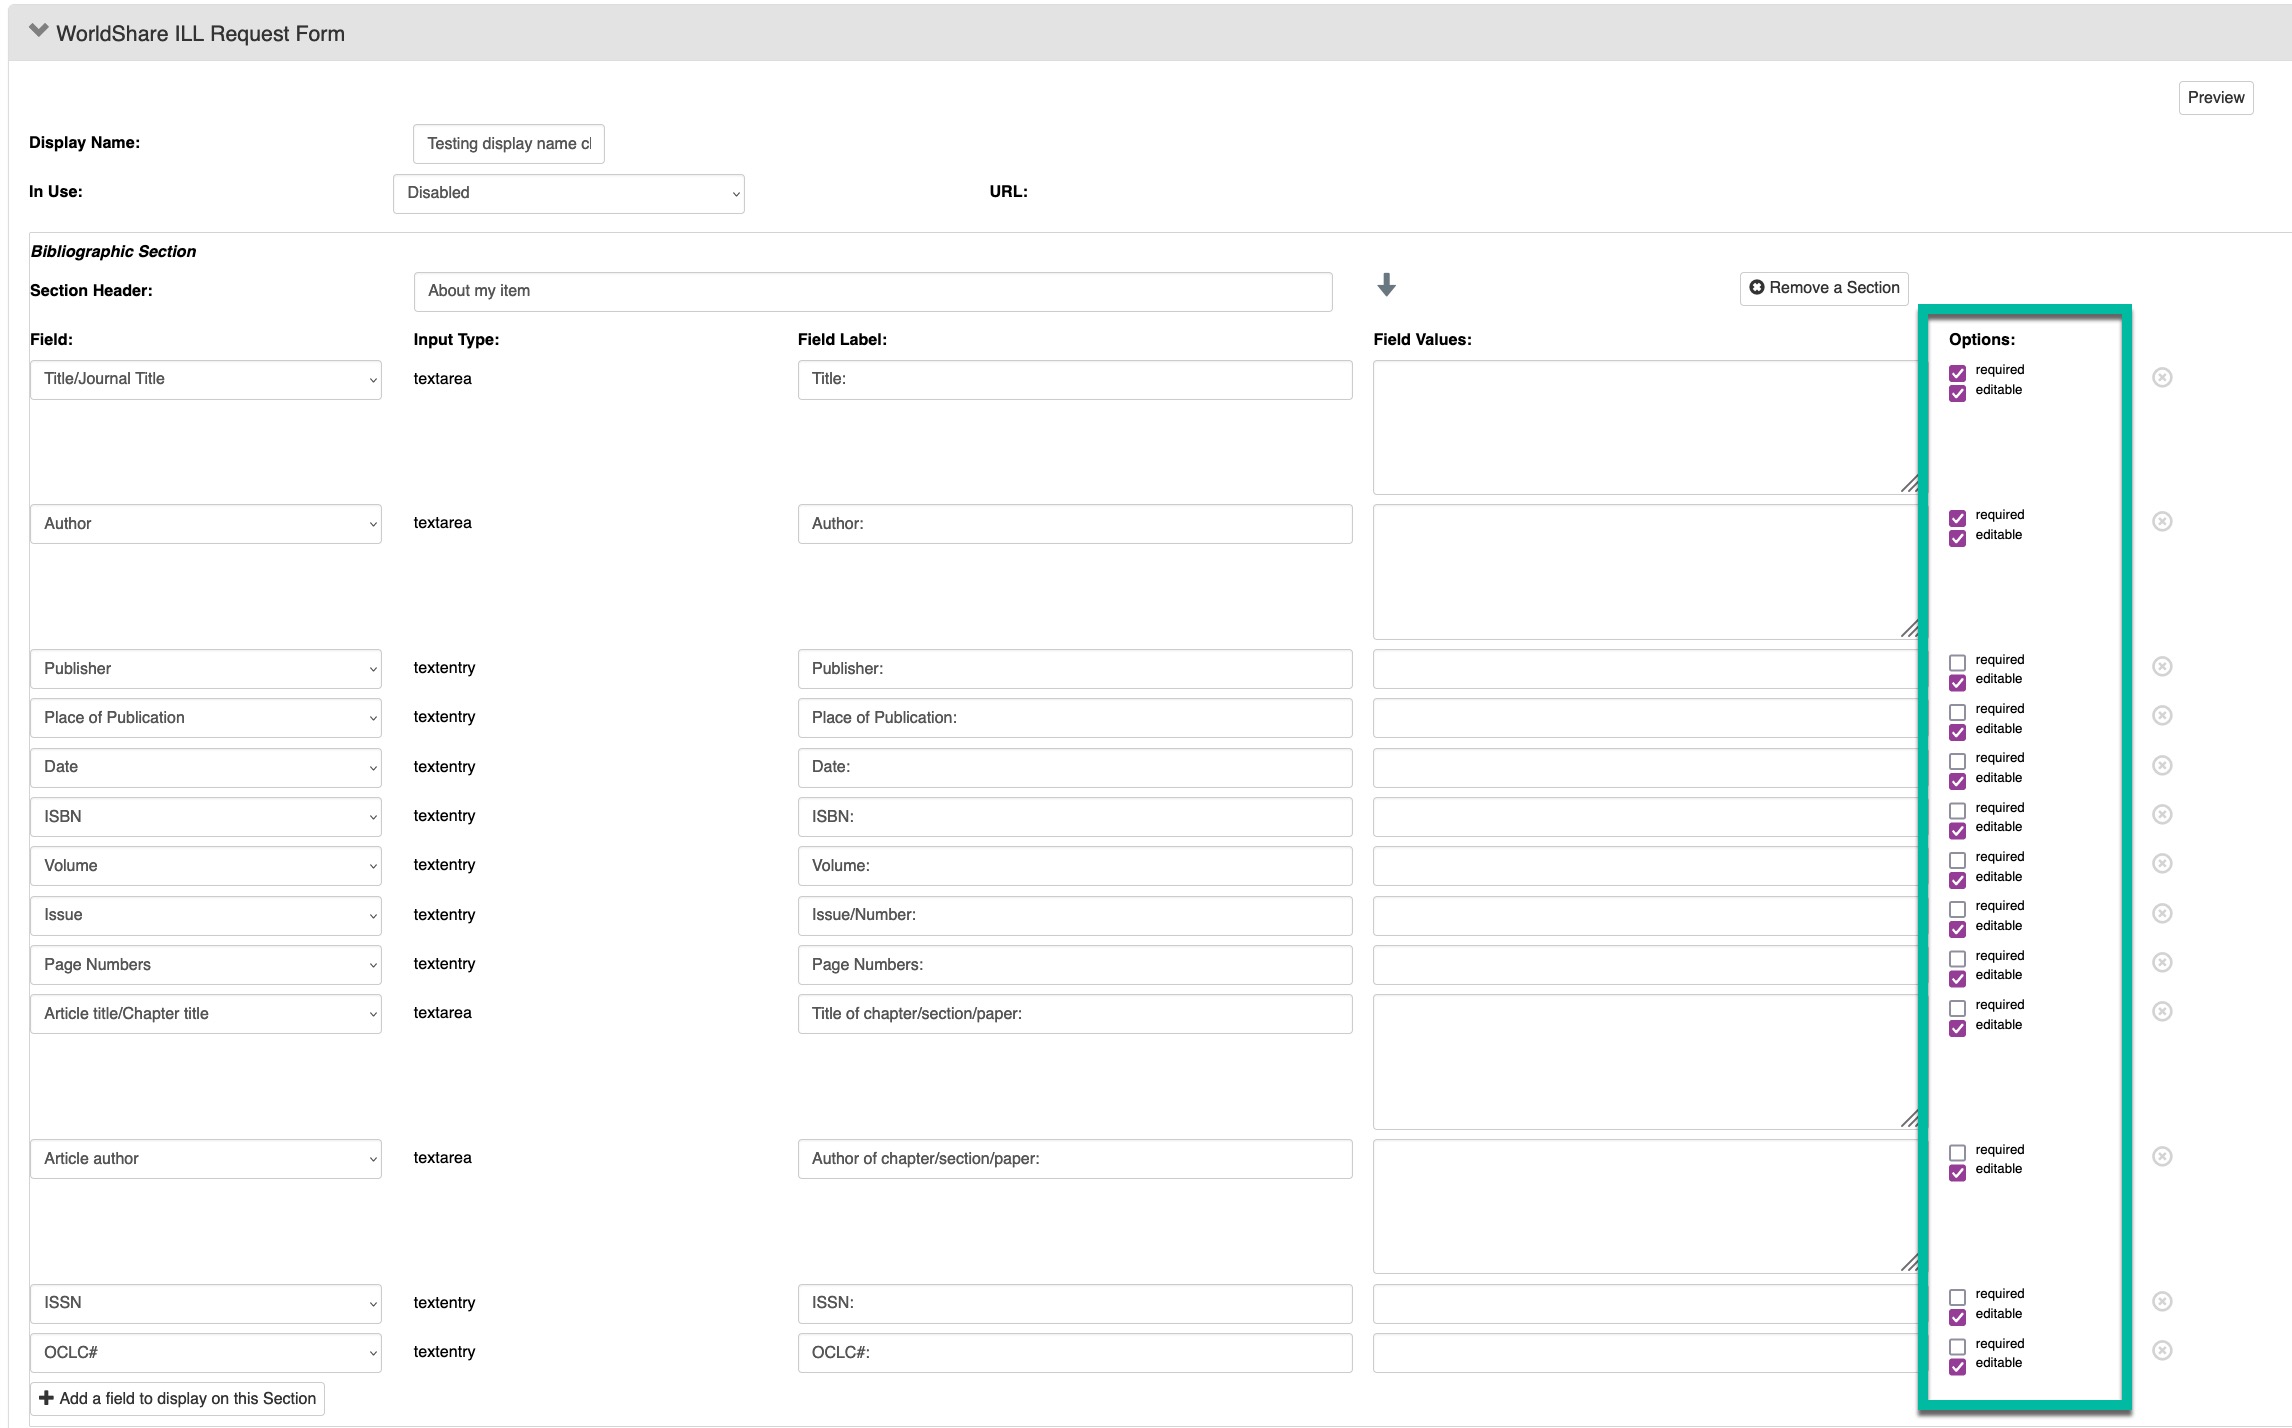 Screenshot of service configuration for the WorldShare ILL form.